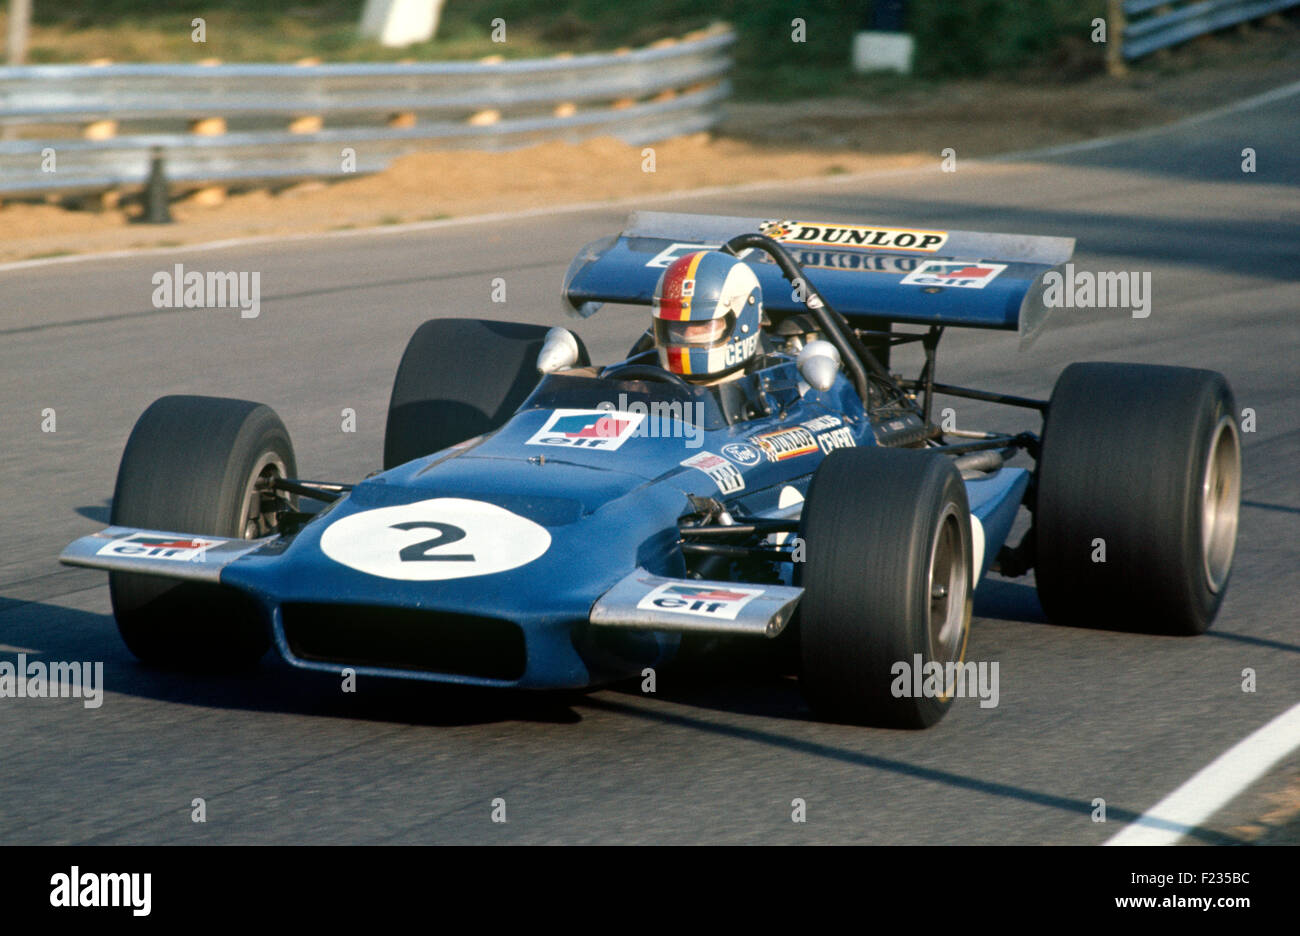 Francois Cevert in a Tyrrell March, Canada Mont-Tremblant, Canadian Grand Prix, 20 September 1970 Stock Photo